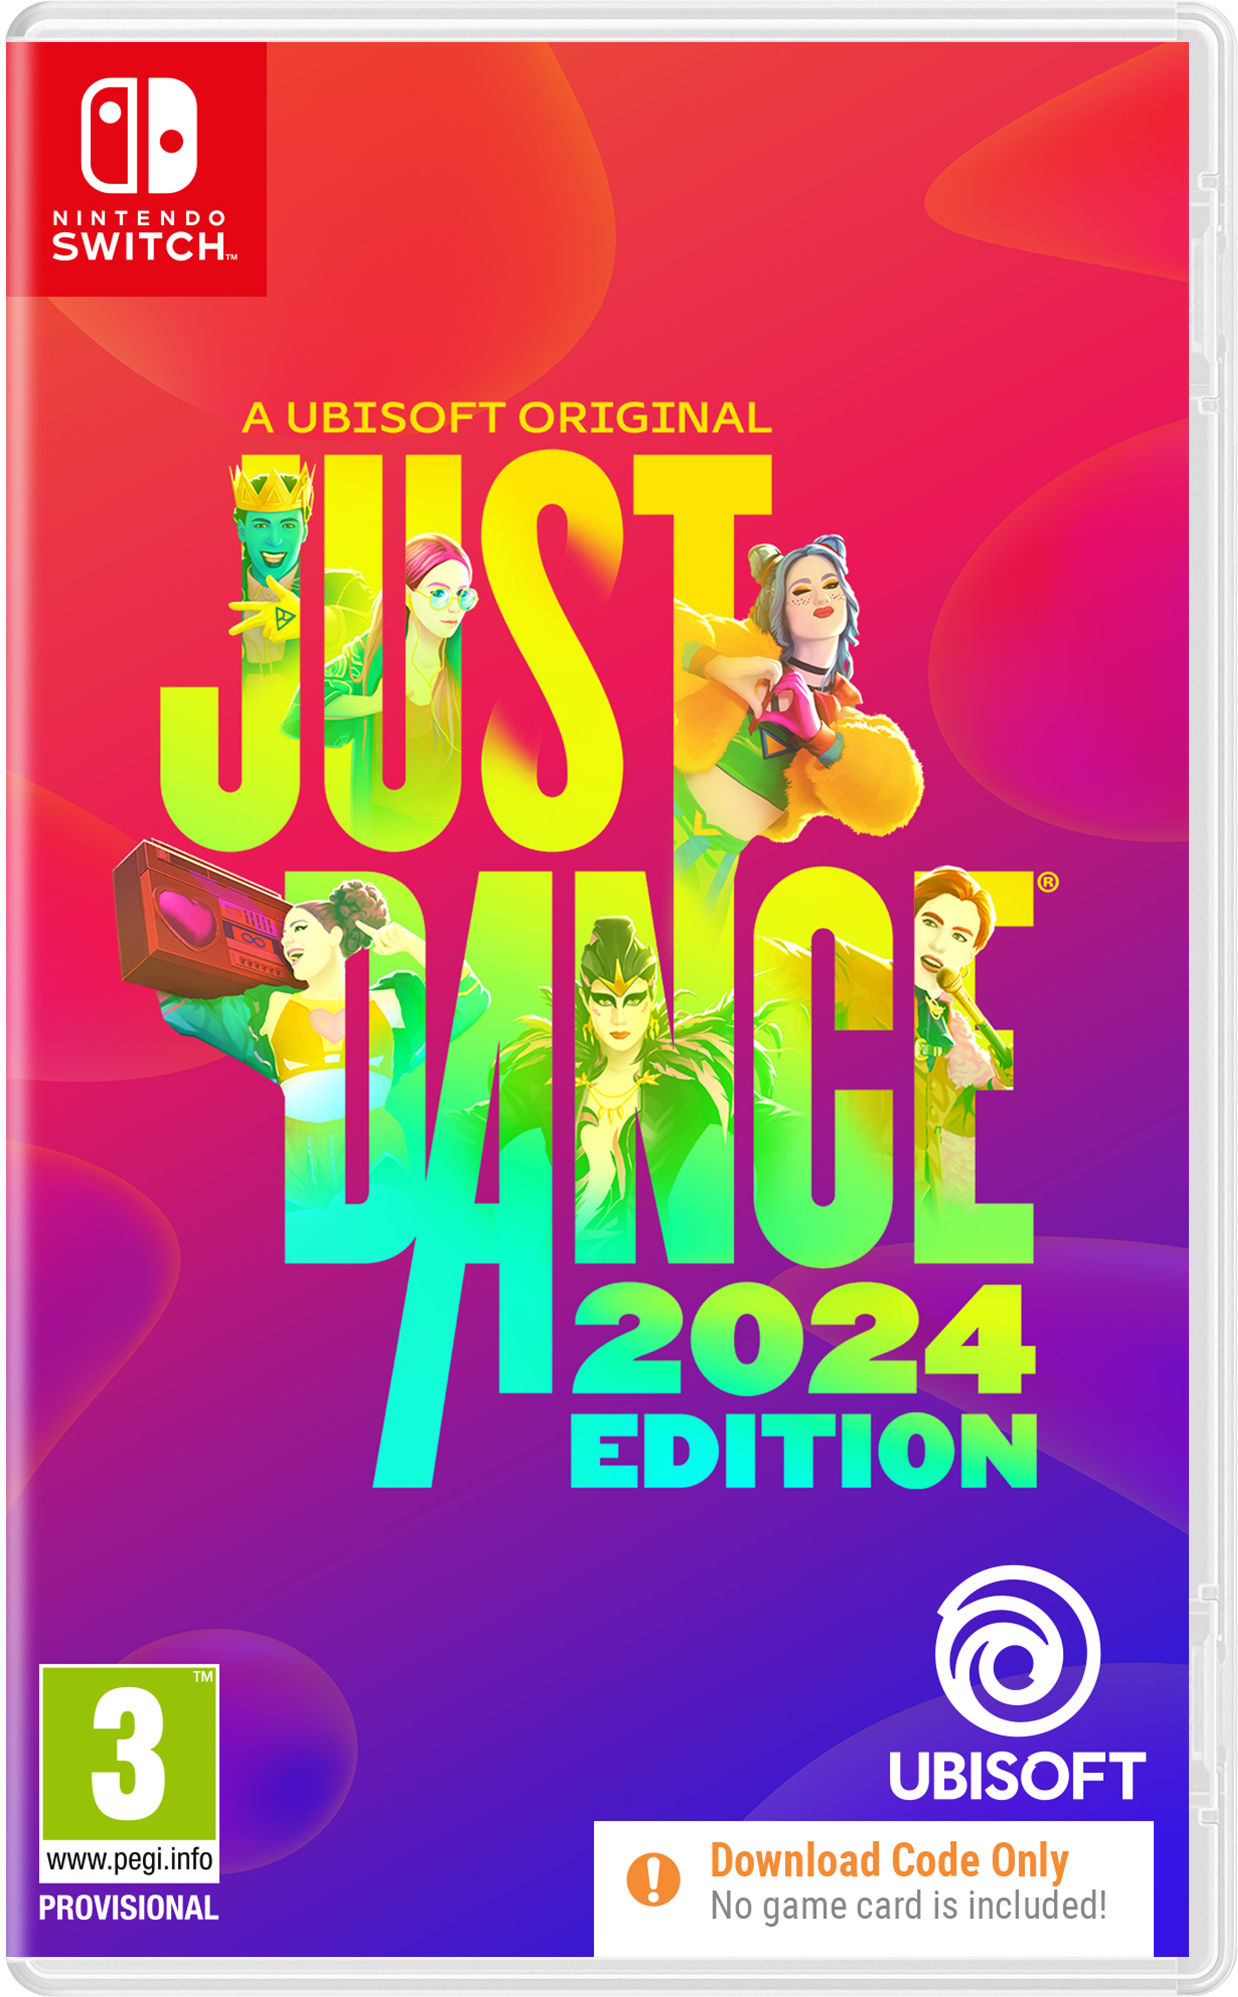 Just Dance 2024 Edition on X: Just Dance 2024 Edition launches on October  24! Featuring 40 new tracks and universes from all genres and eras,  including “Flowers” by Miley Cyrus, “Tití Me